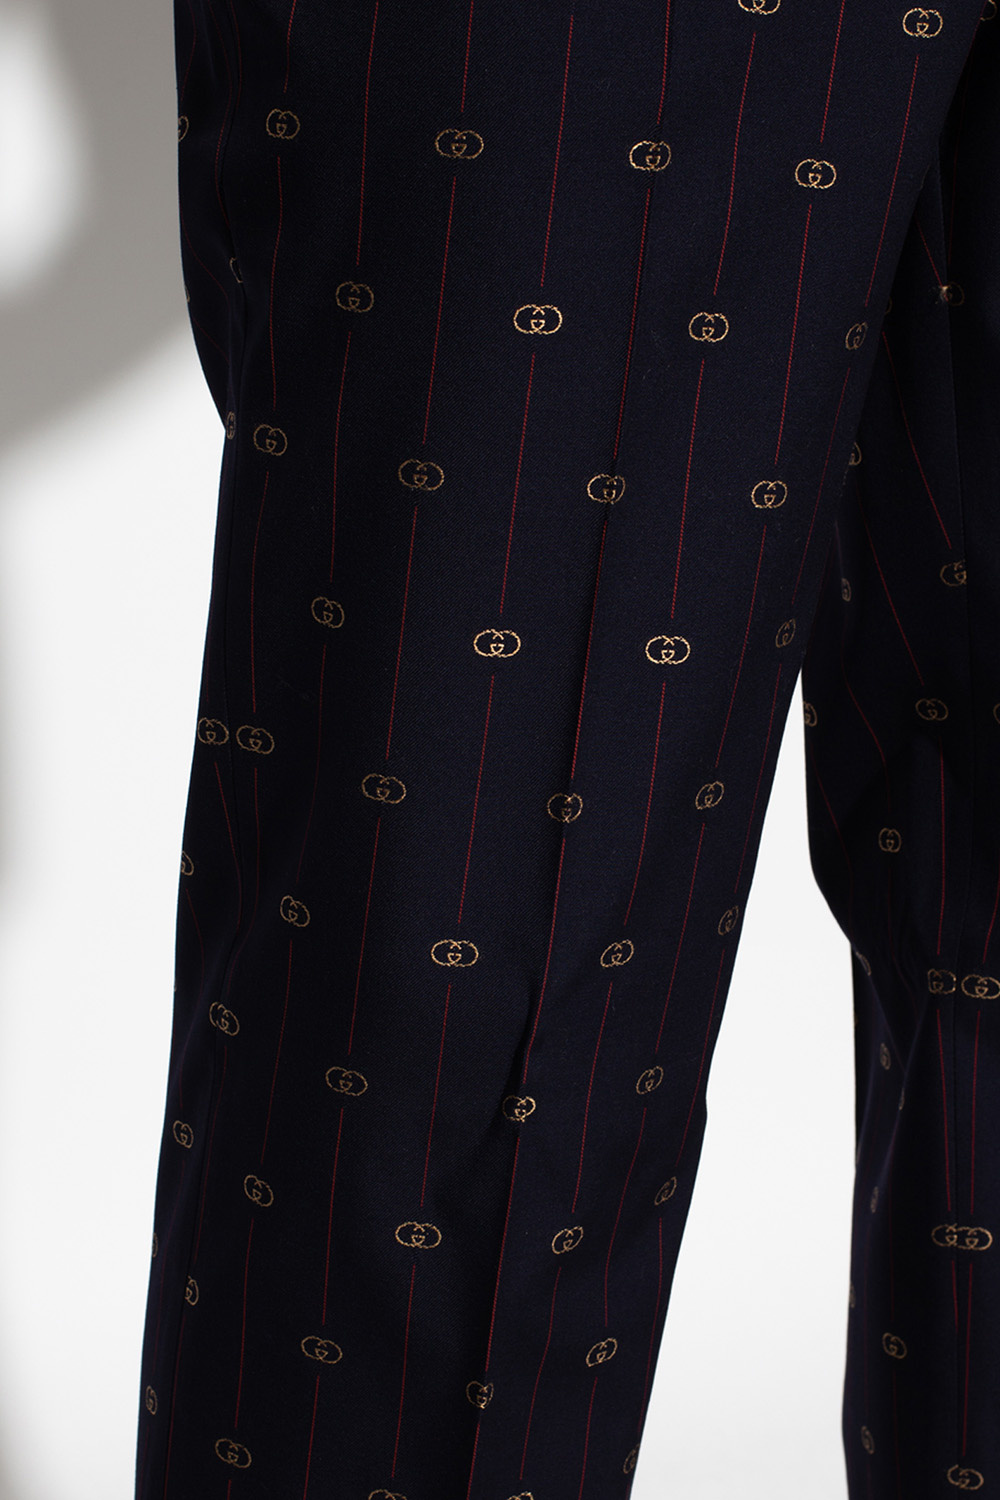 Gucci Suit with GG monogram, Men's Clothing